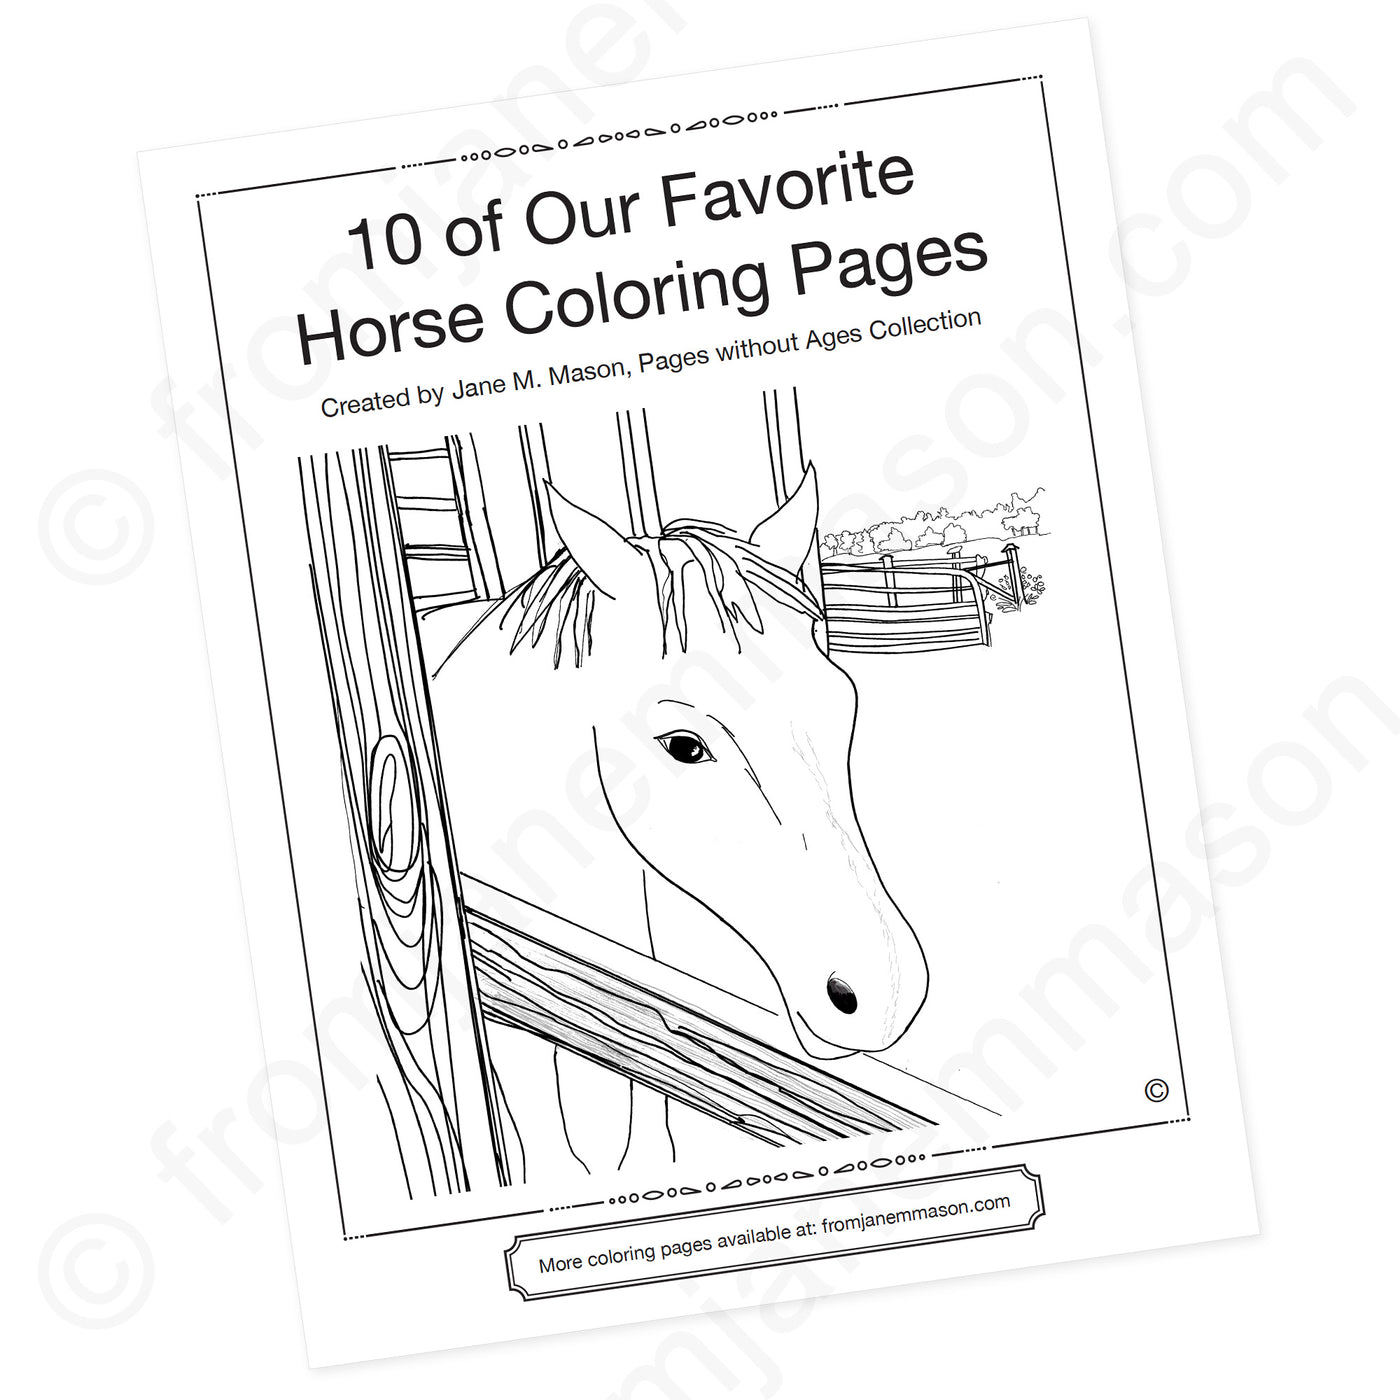 Horse coloring book featuring our favorite original horse drawings â from jane m mason